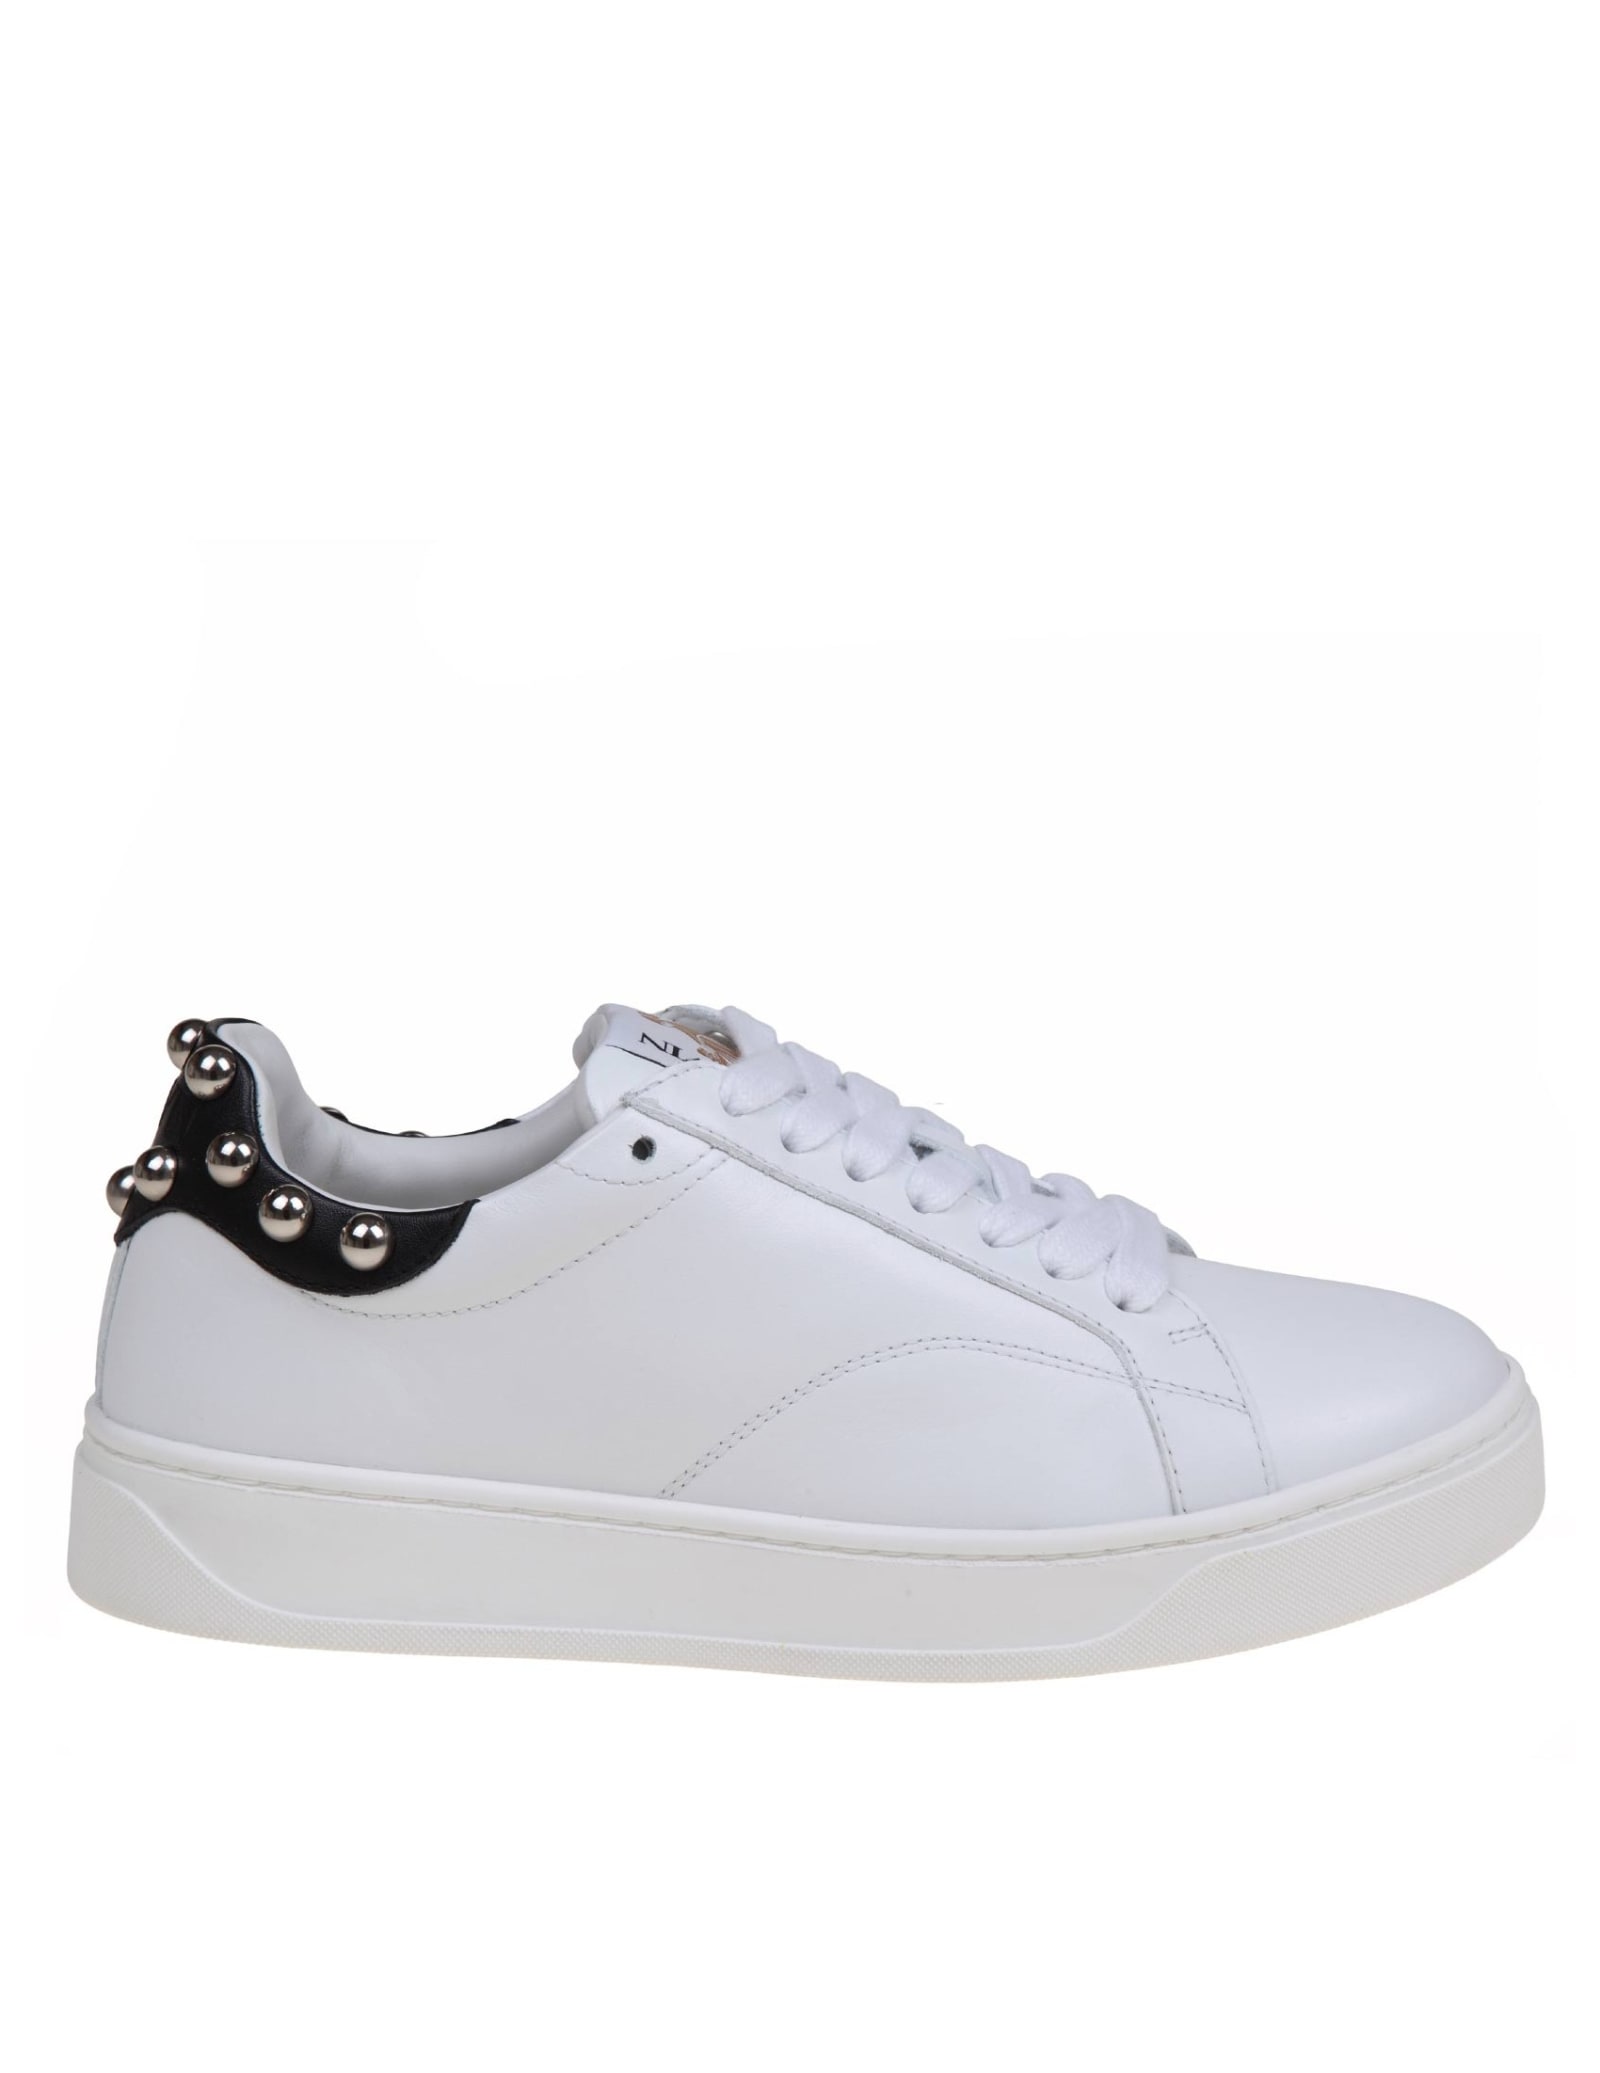 LANVIN DDB0 SNEAKERS IN LEATHER WITH APPLIED STUDS